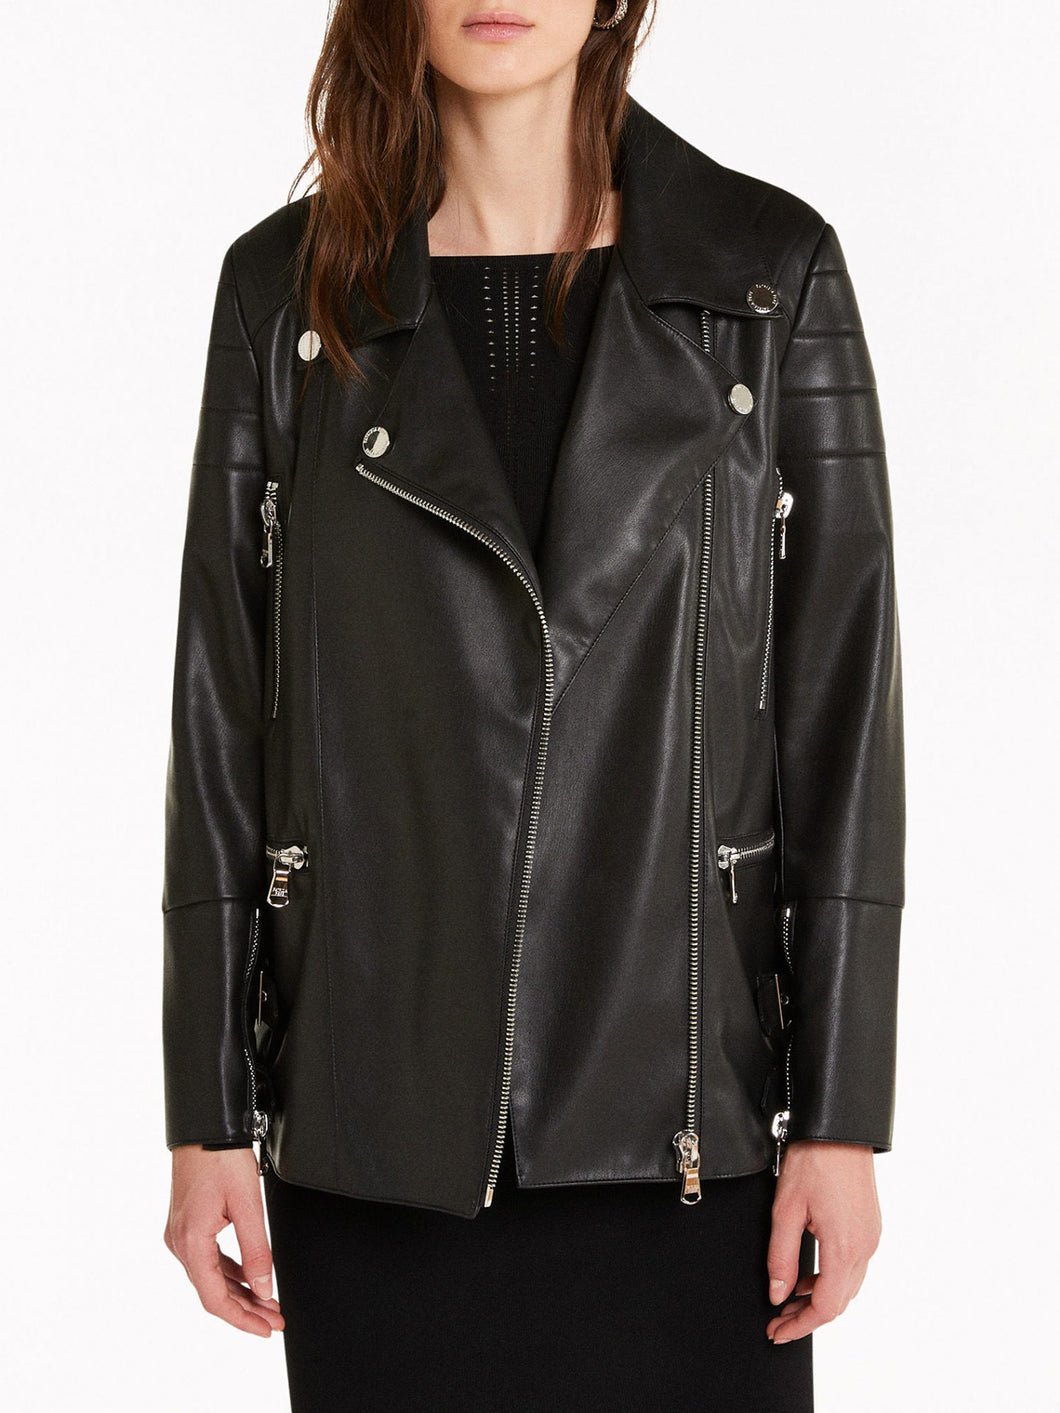 Over-Sized Style Women's Black Faux Leather Jacket